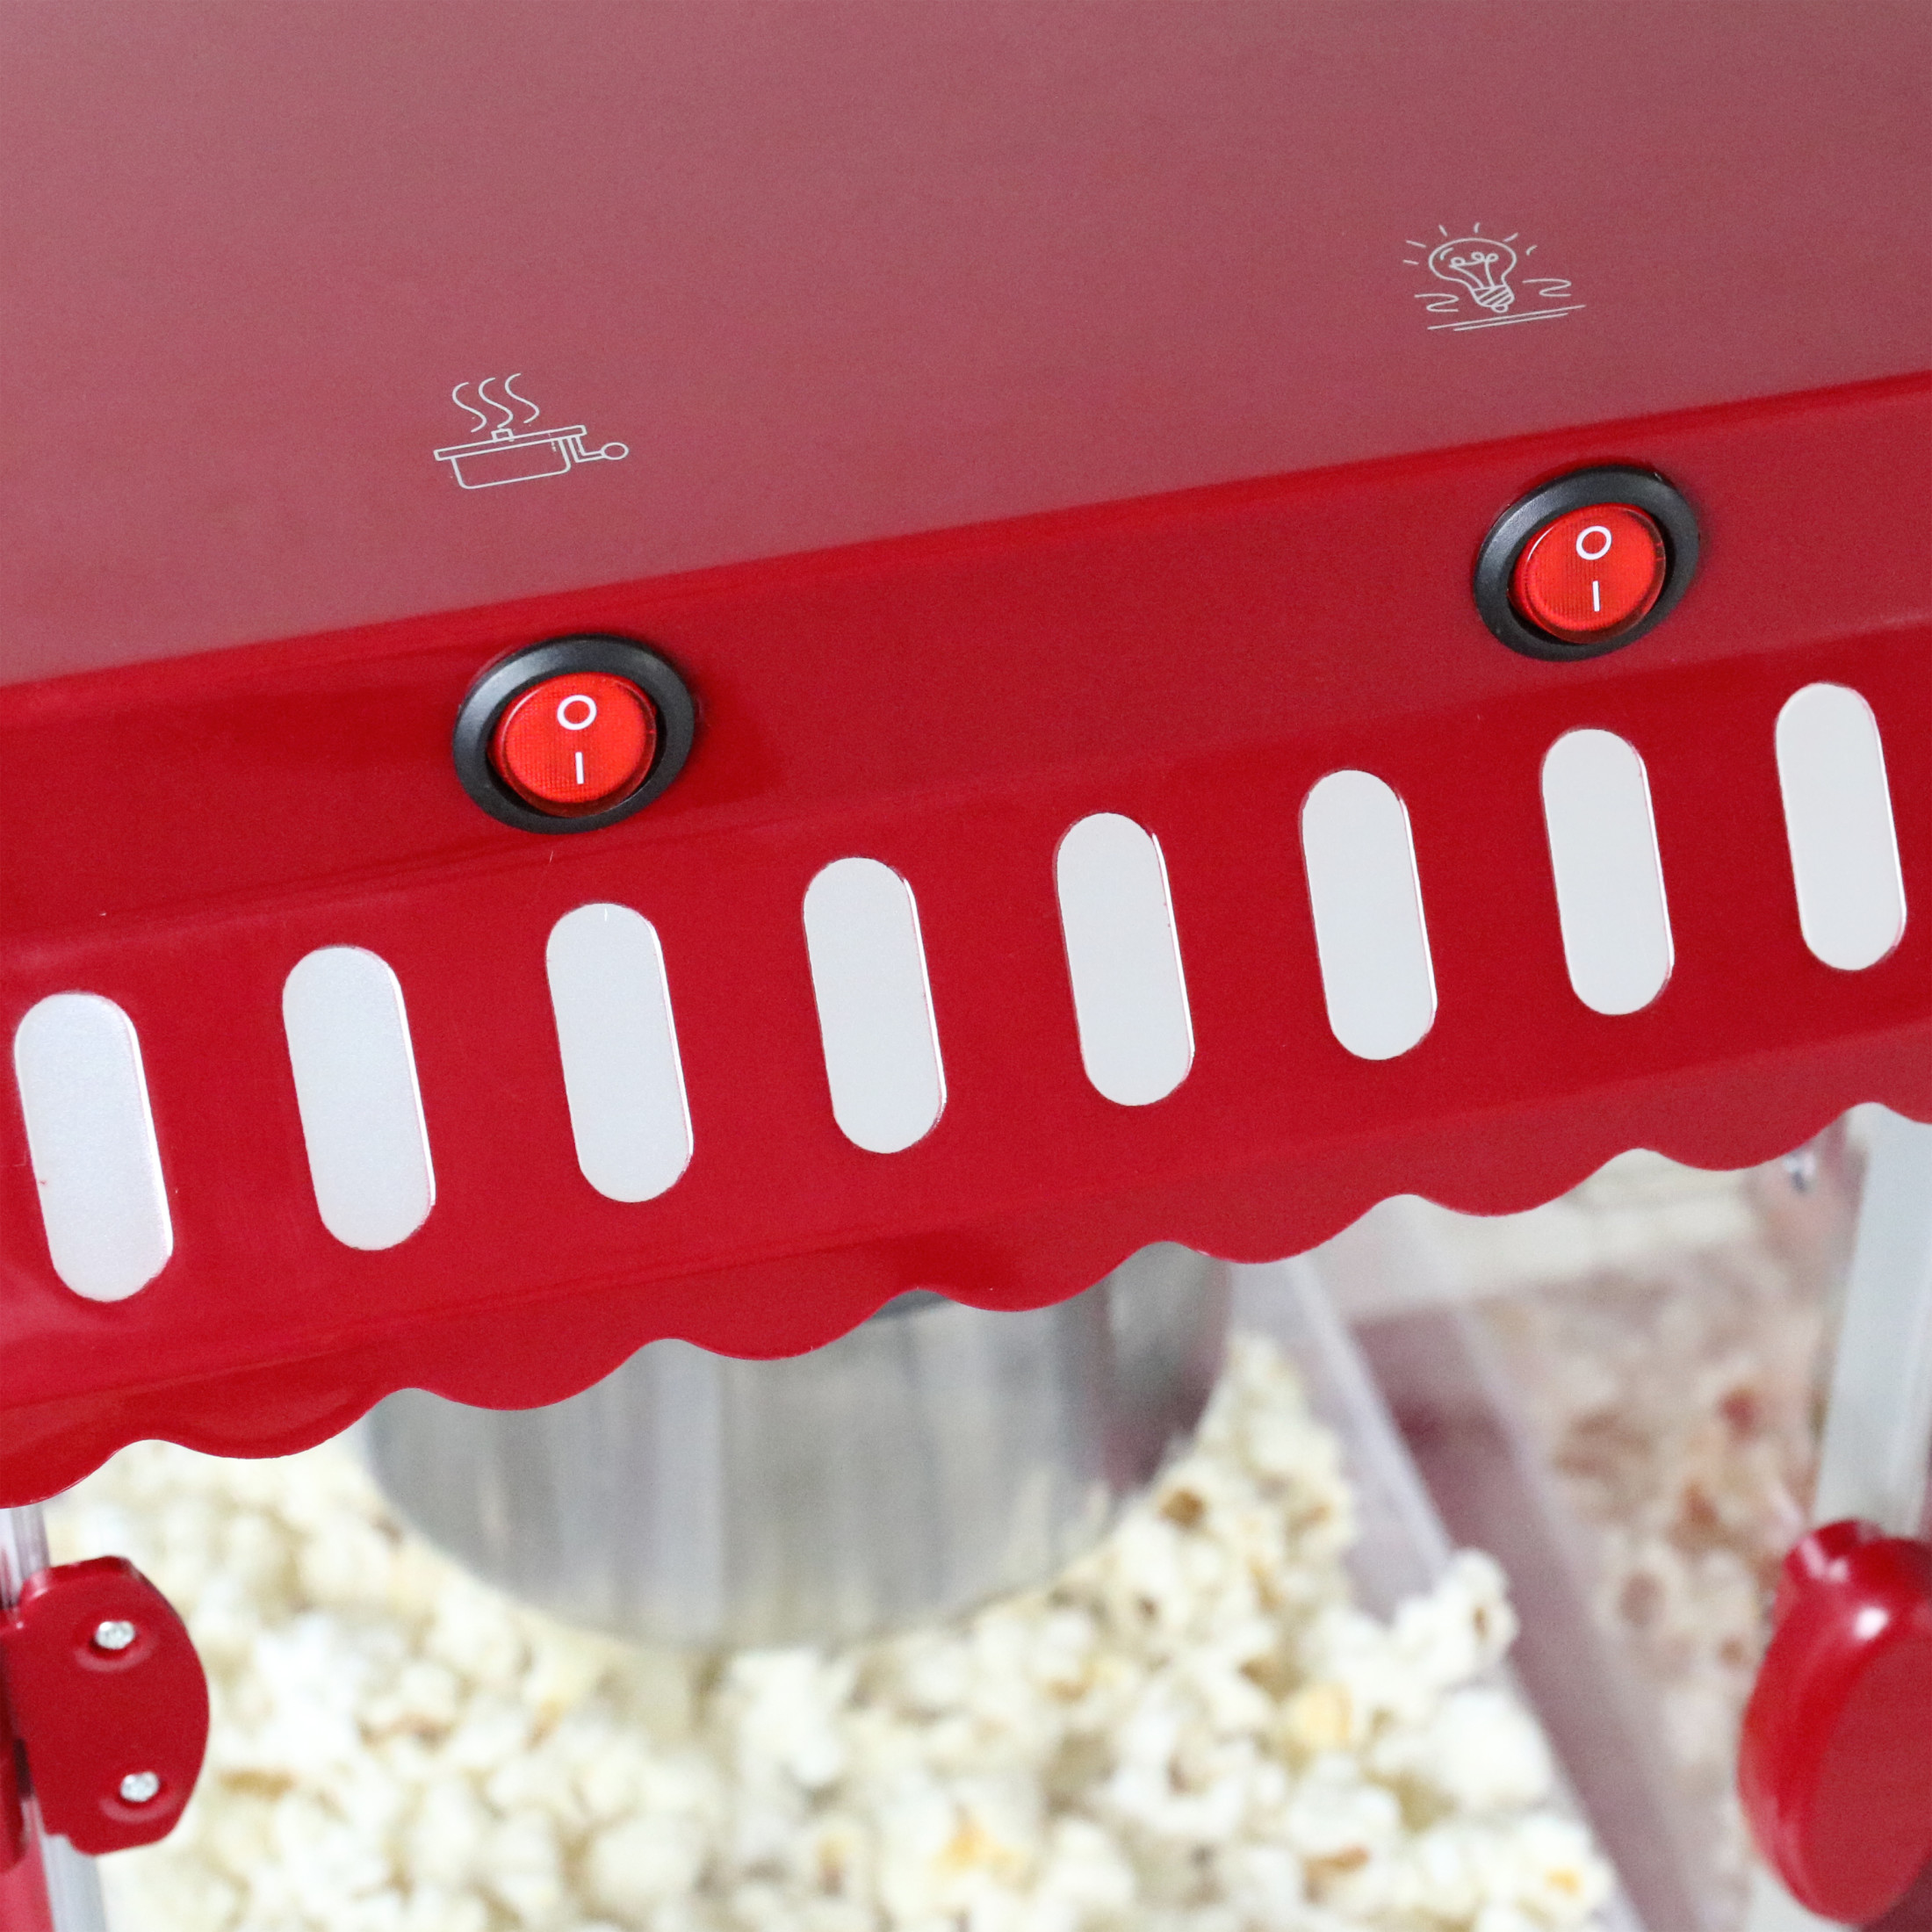 West Bend Popcorn Machine and Cart, 10-Cup Capacity, in Red (PCMC20RD13), 14.35 lb., New - image 3 of 6